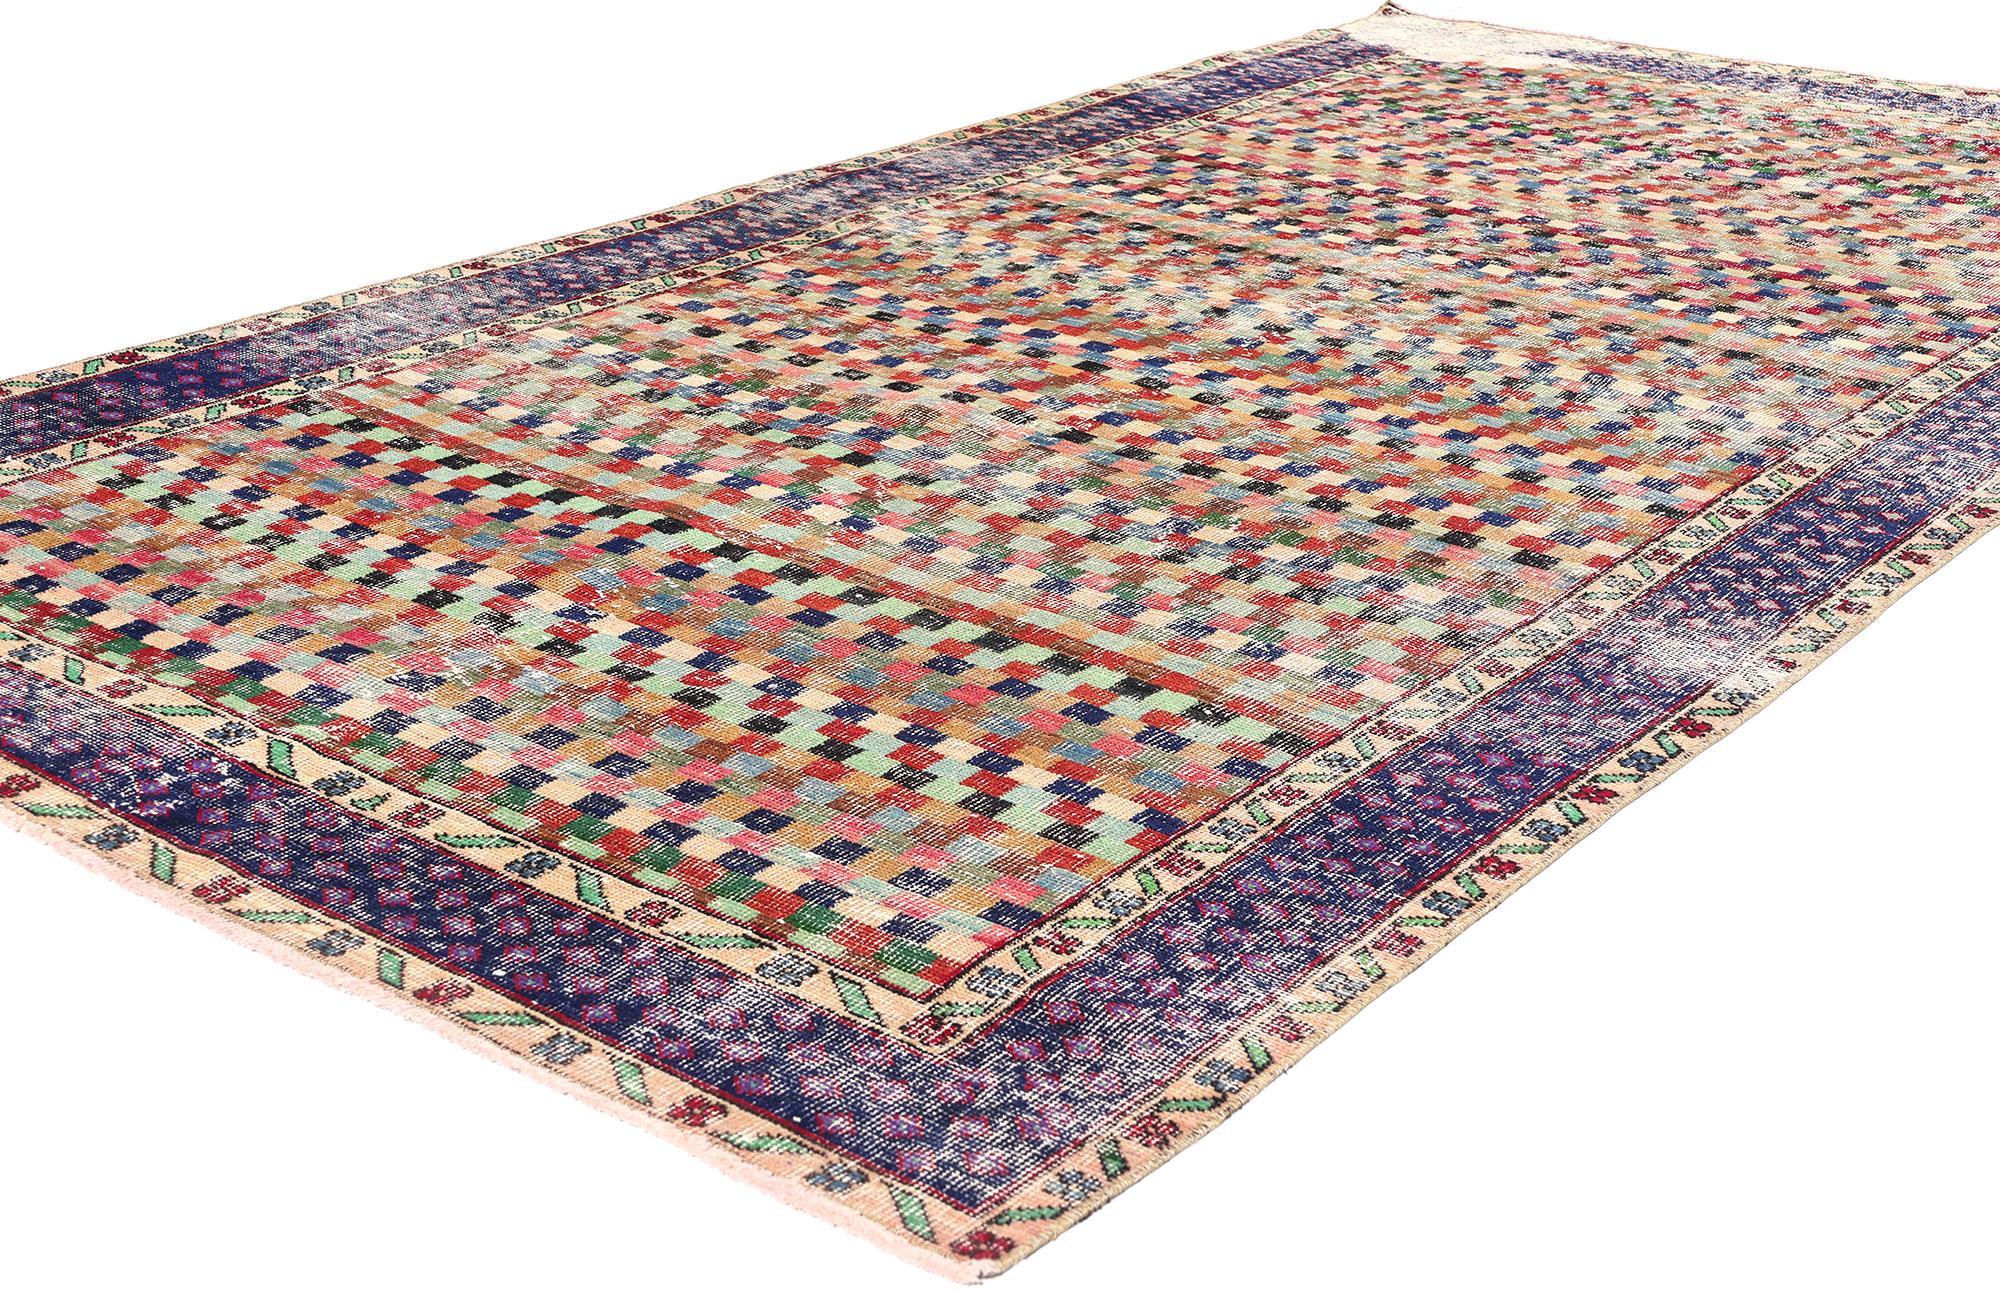 53311 Zeki Muren Distressed Vintage Turkish Sivas Rug, 04'09 x 09'04. Nestled within the serene landscapes of Turkey's Sivas region, Zeki Muren Turkish Sivas rugs honor the legacy of the esteemed Turkish singer who continues to inspire. Celebrated